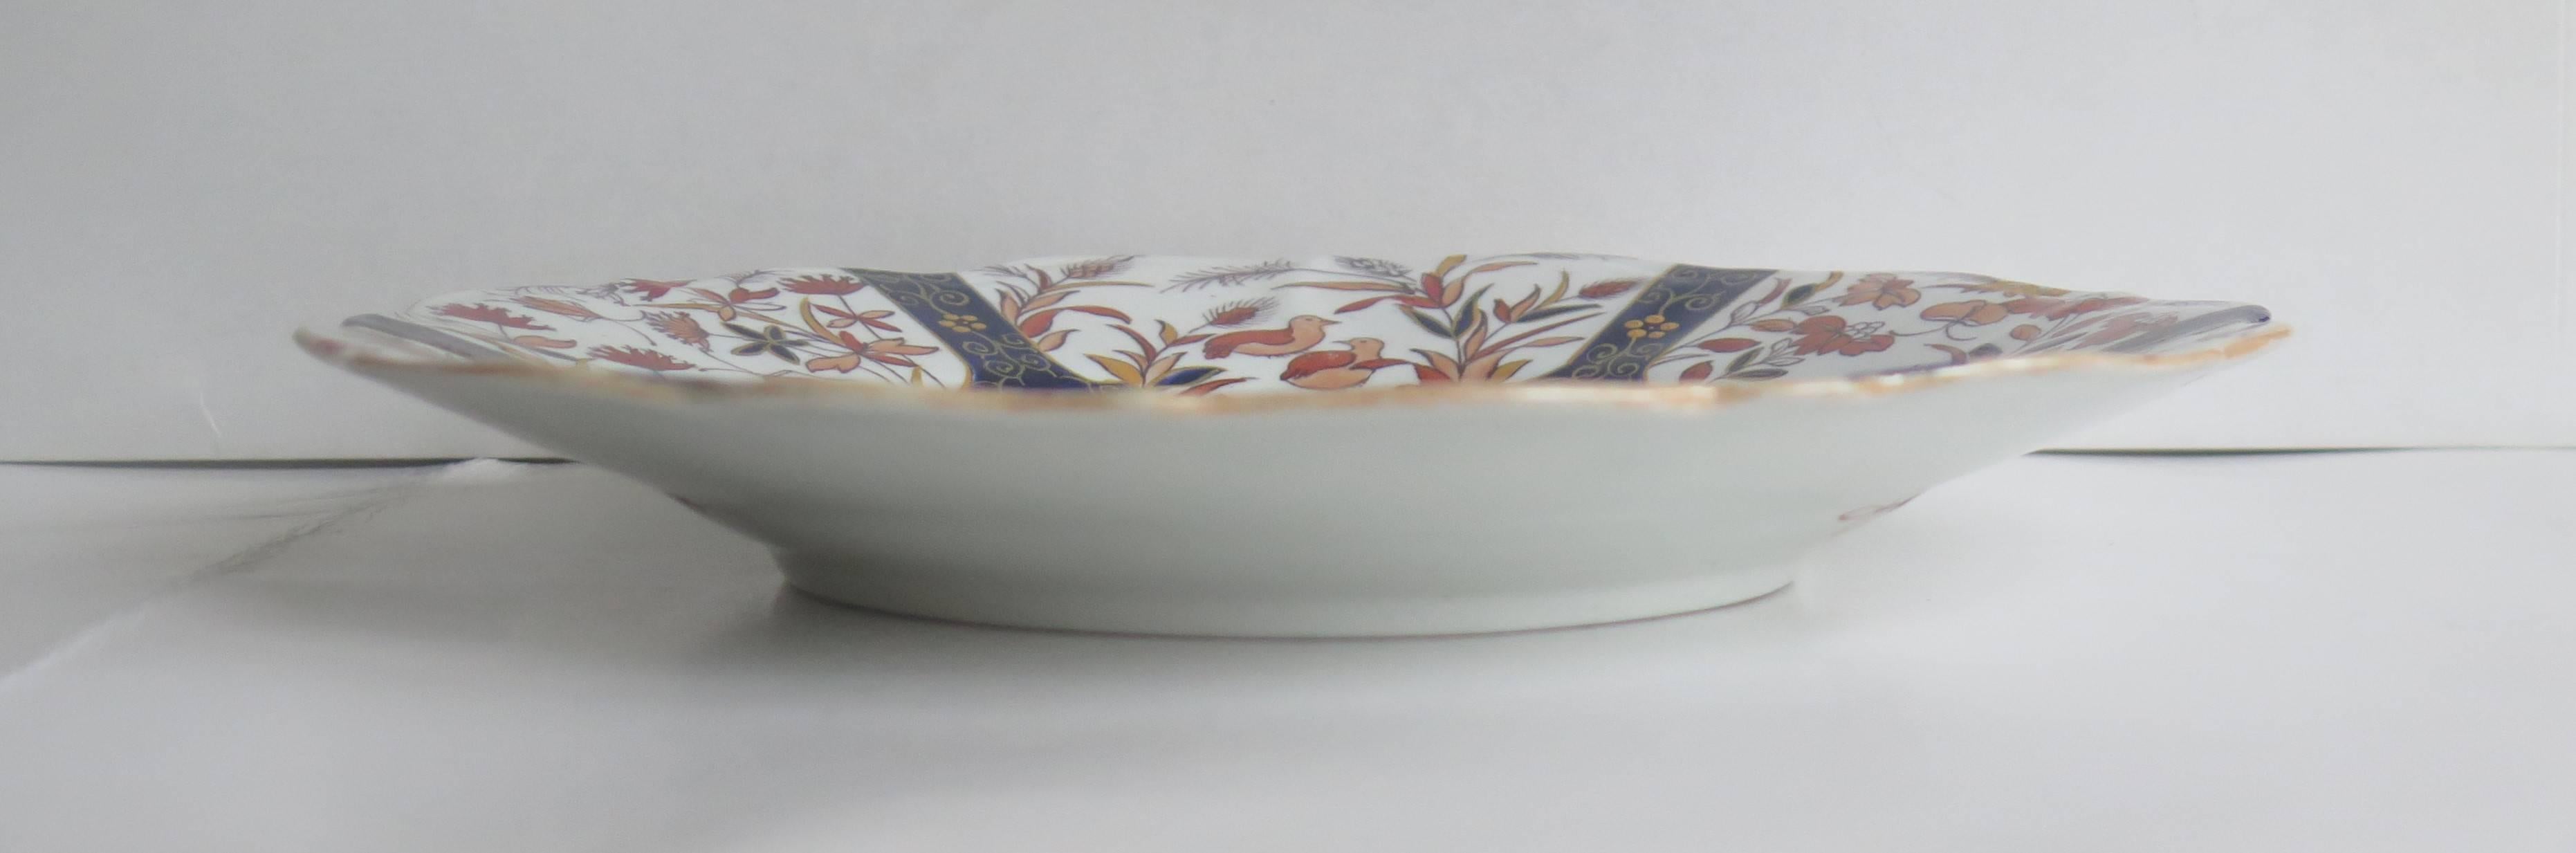 19th Century Mason's Ironstone Desert Plate Fence and Bowl Pattern Hand-Painted, circa 1825